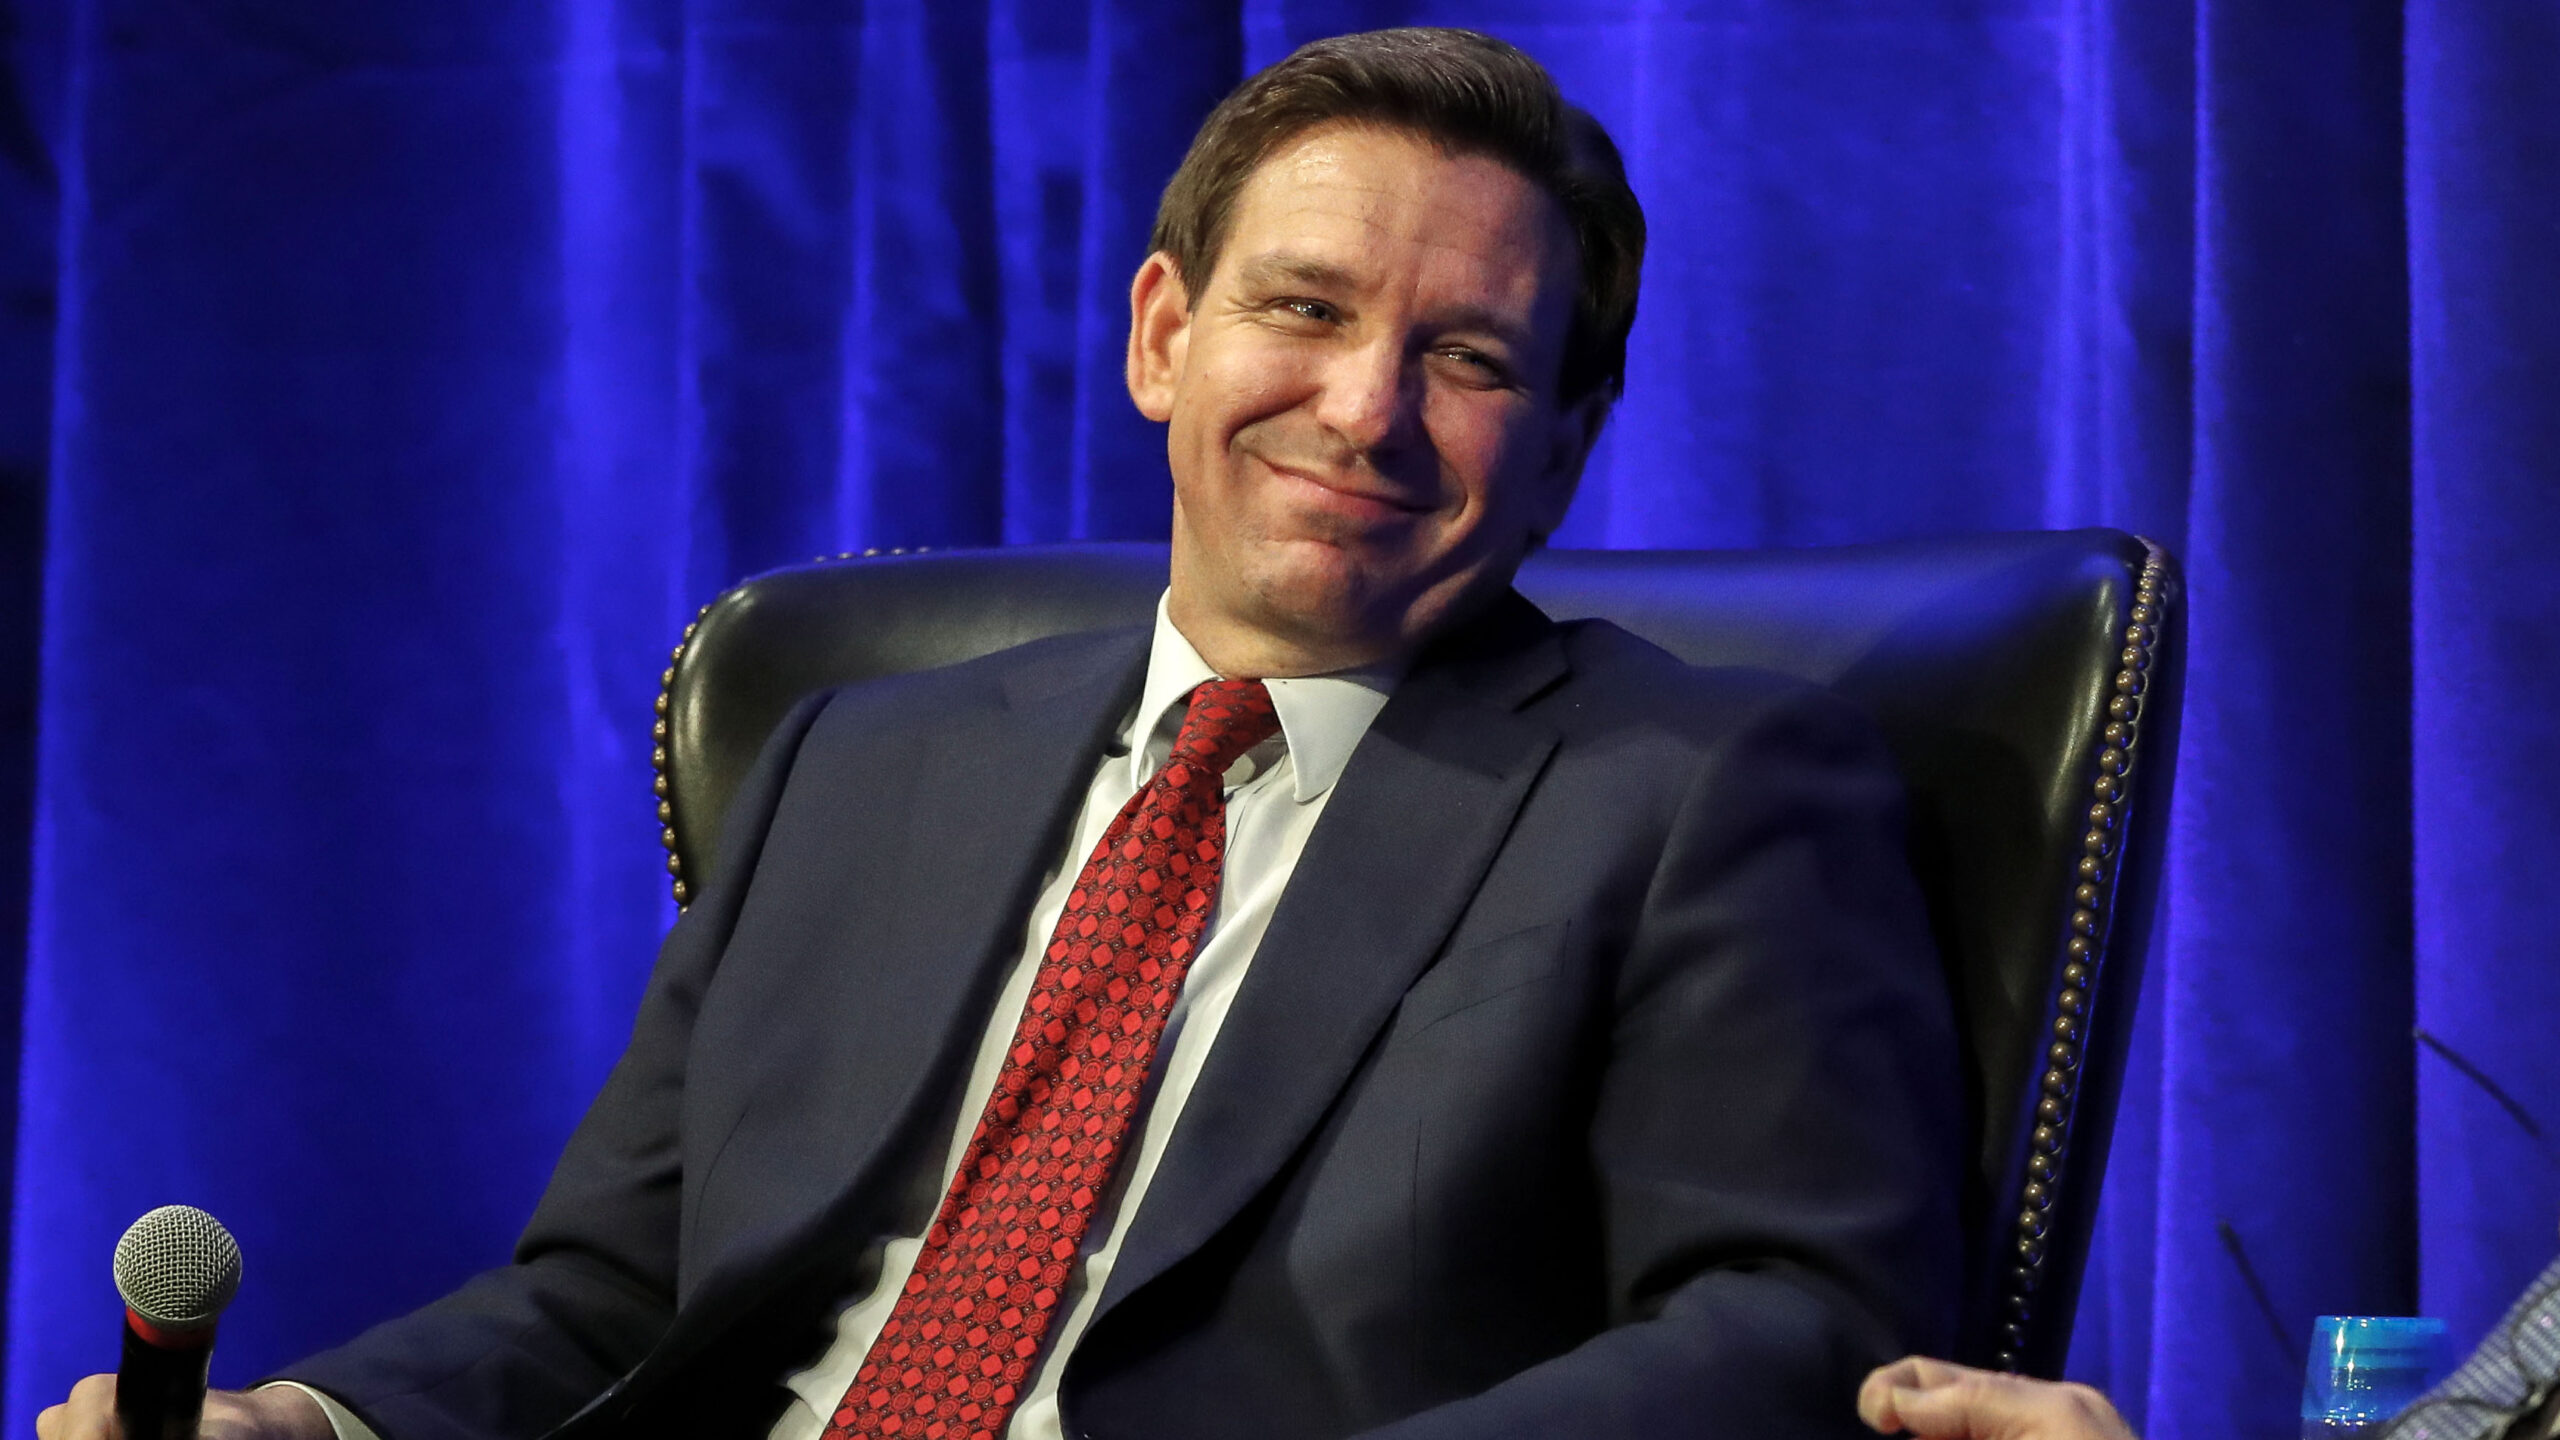 GOP Big Donor Ditches Trump, Supports DeSantis for 2024 Presidency.